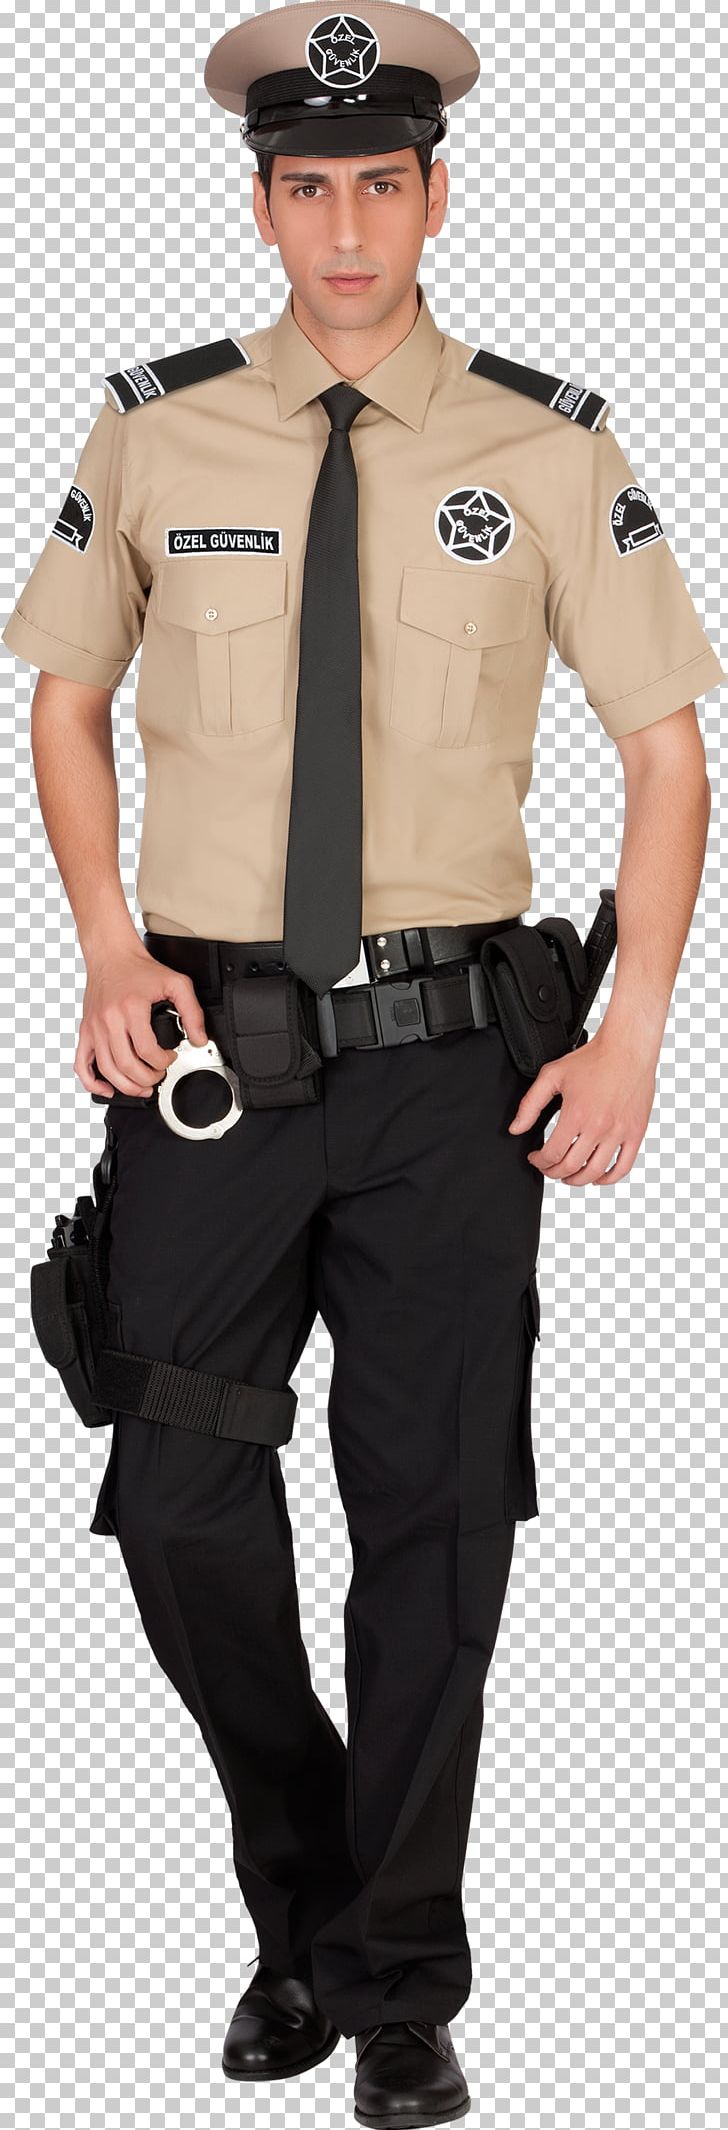 Police Officer Security Guard Military Uniform PNG, Clipart, Army Officer, Costume, Dress, Job, Jumpsuit Free PNG Download